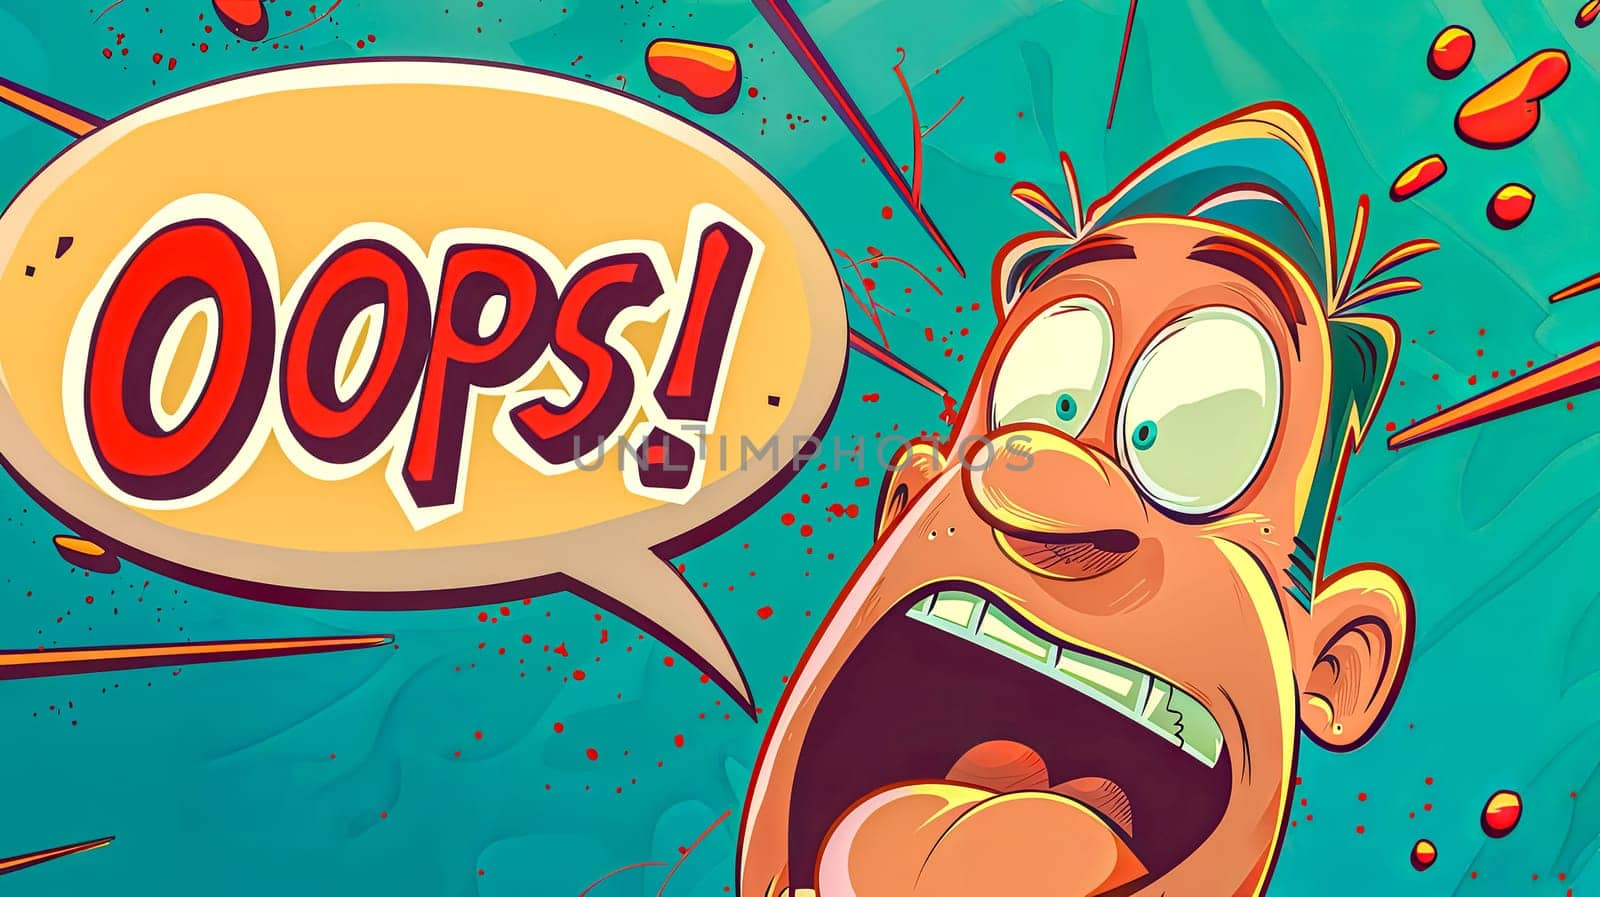 Cartoon blunder - oops expression illustration by Edophoto